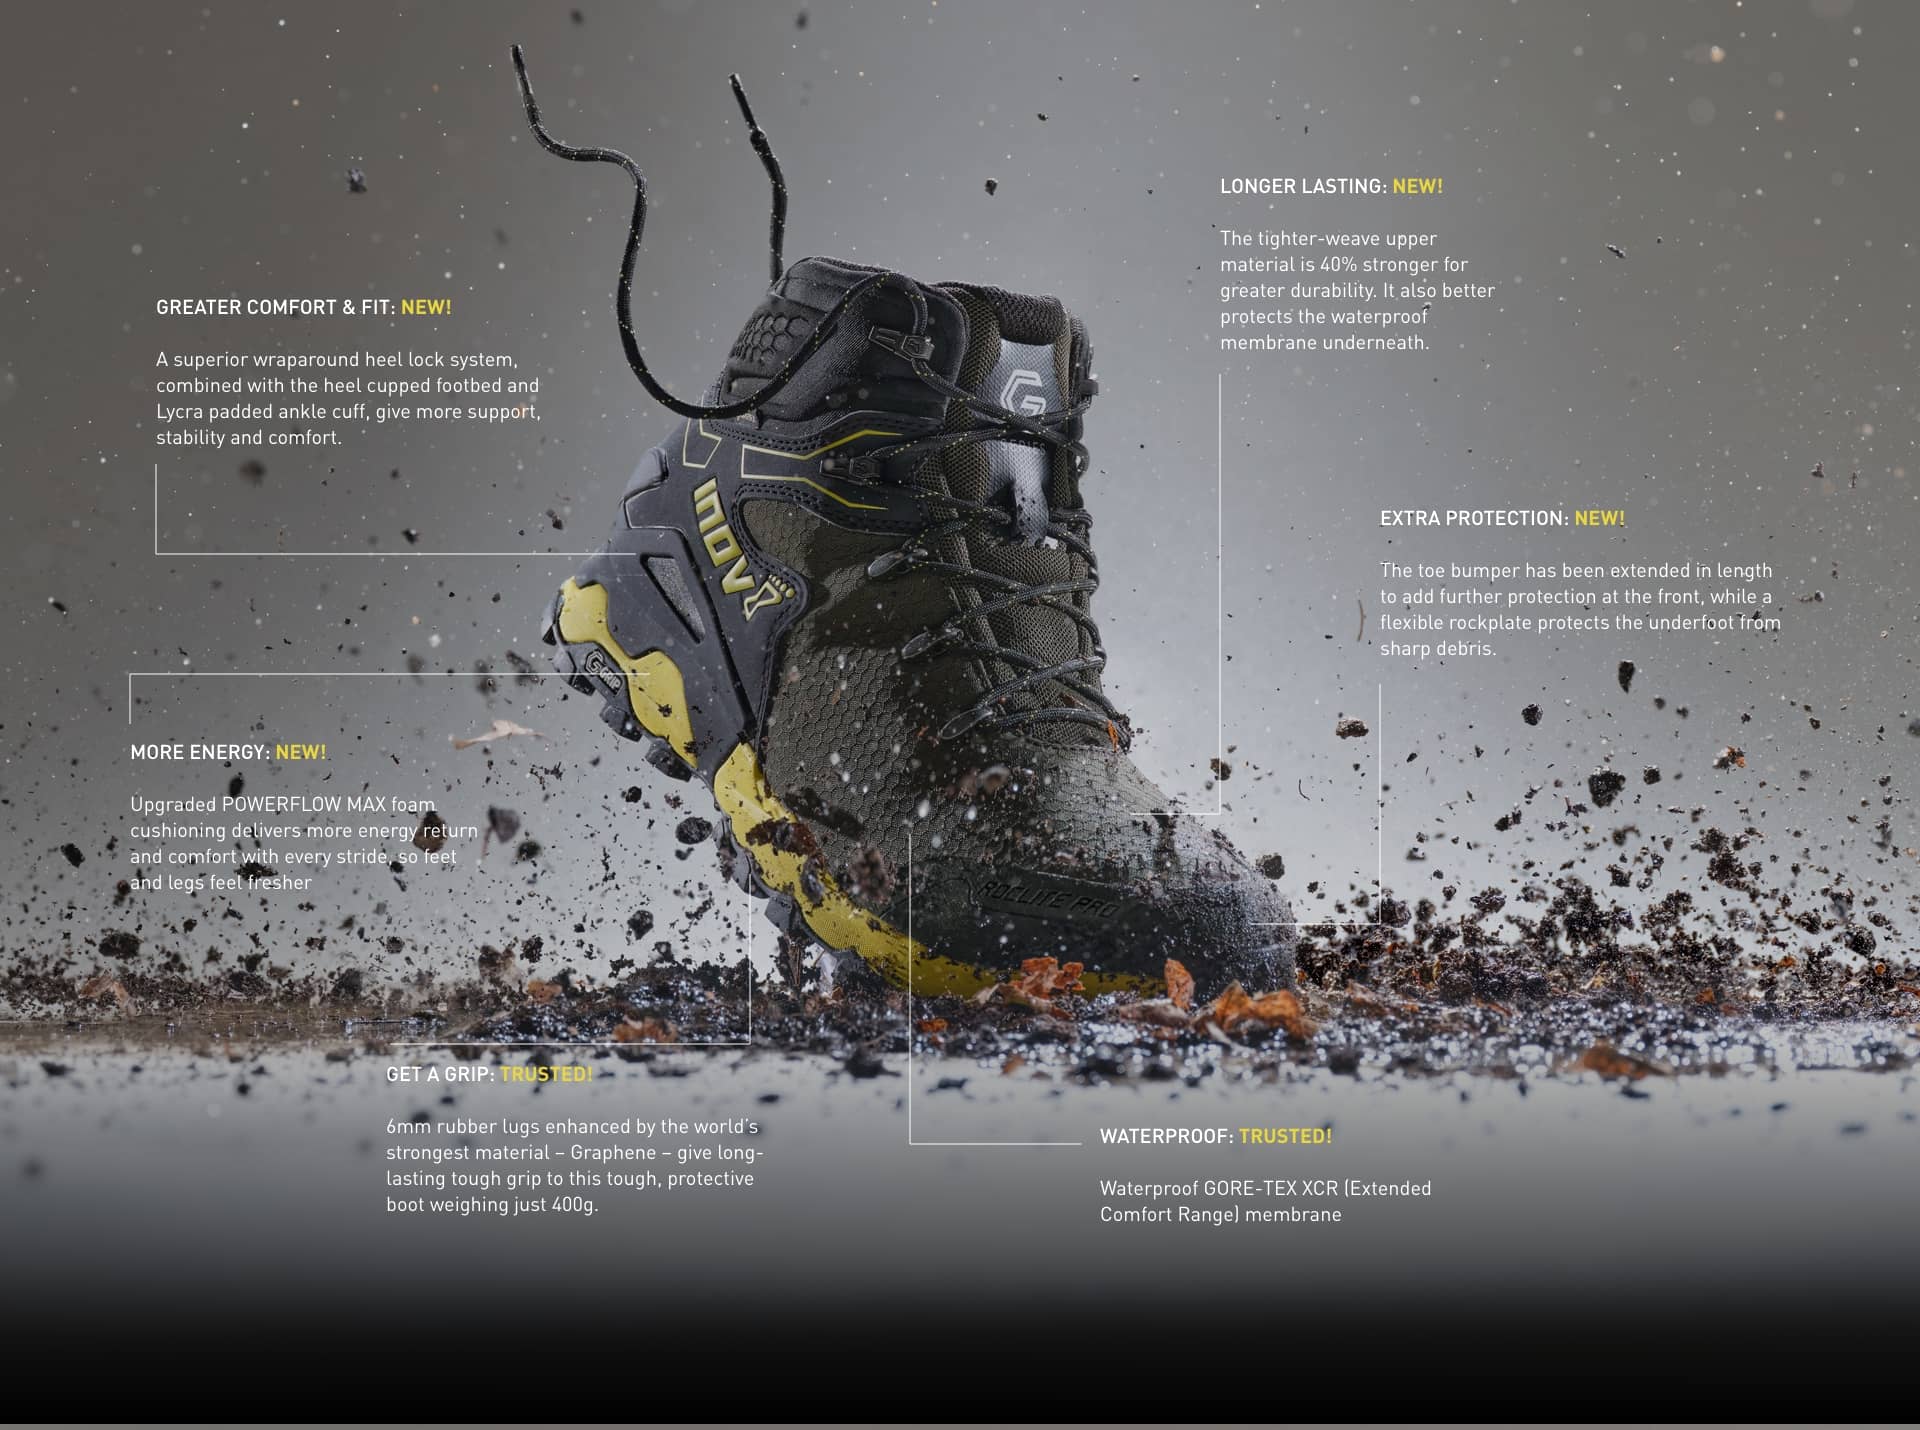 Graphic describing the improved comfort, fit, durability, cushioning and toe bumper of the ROCLITE PRO G 400 GTX V2 hiking boots